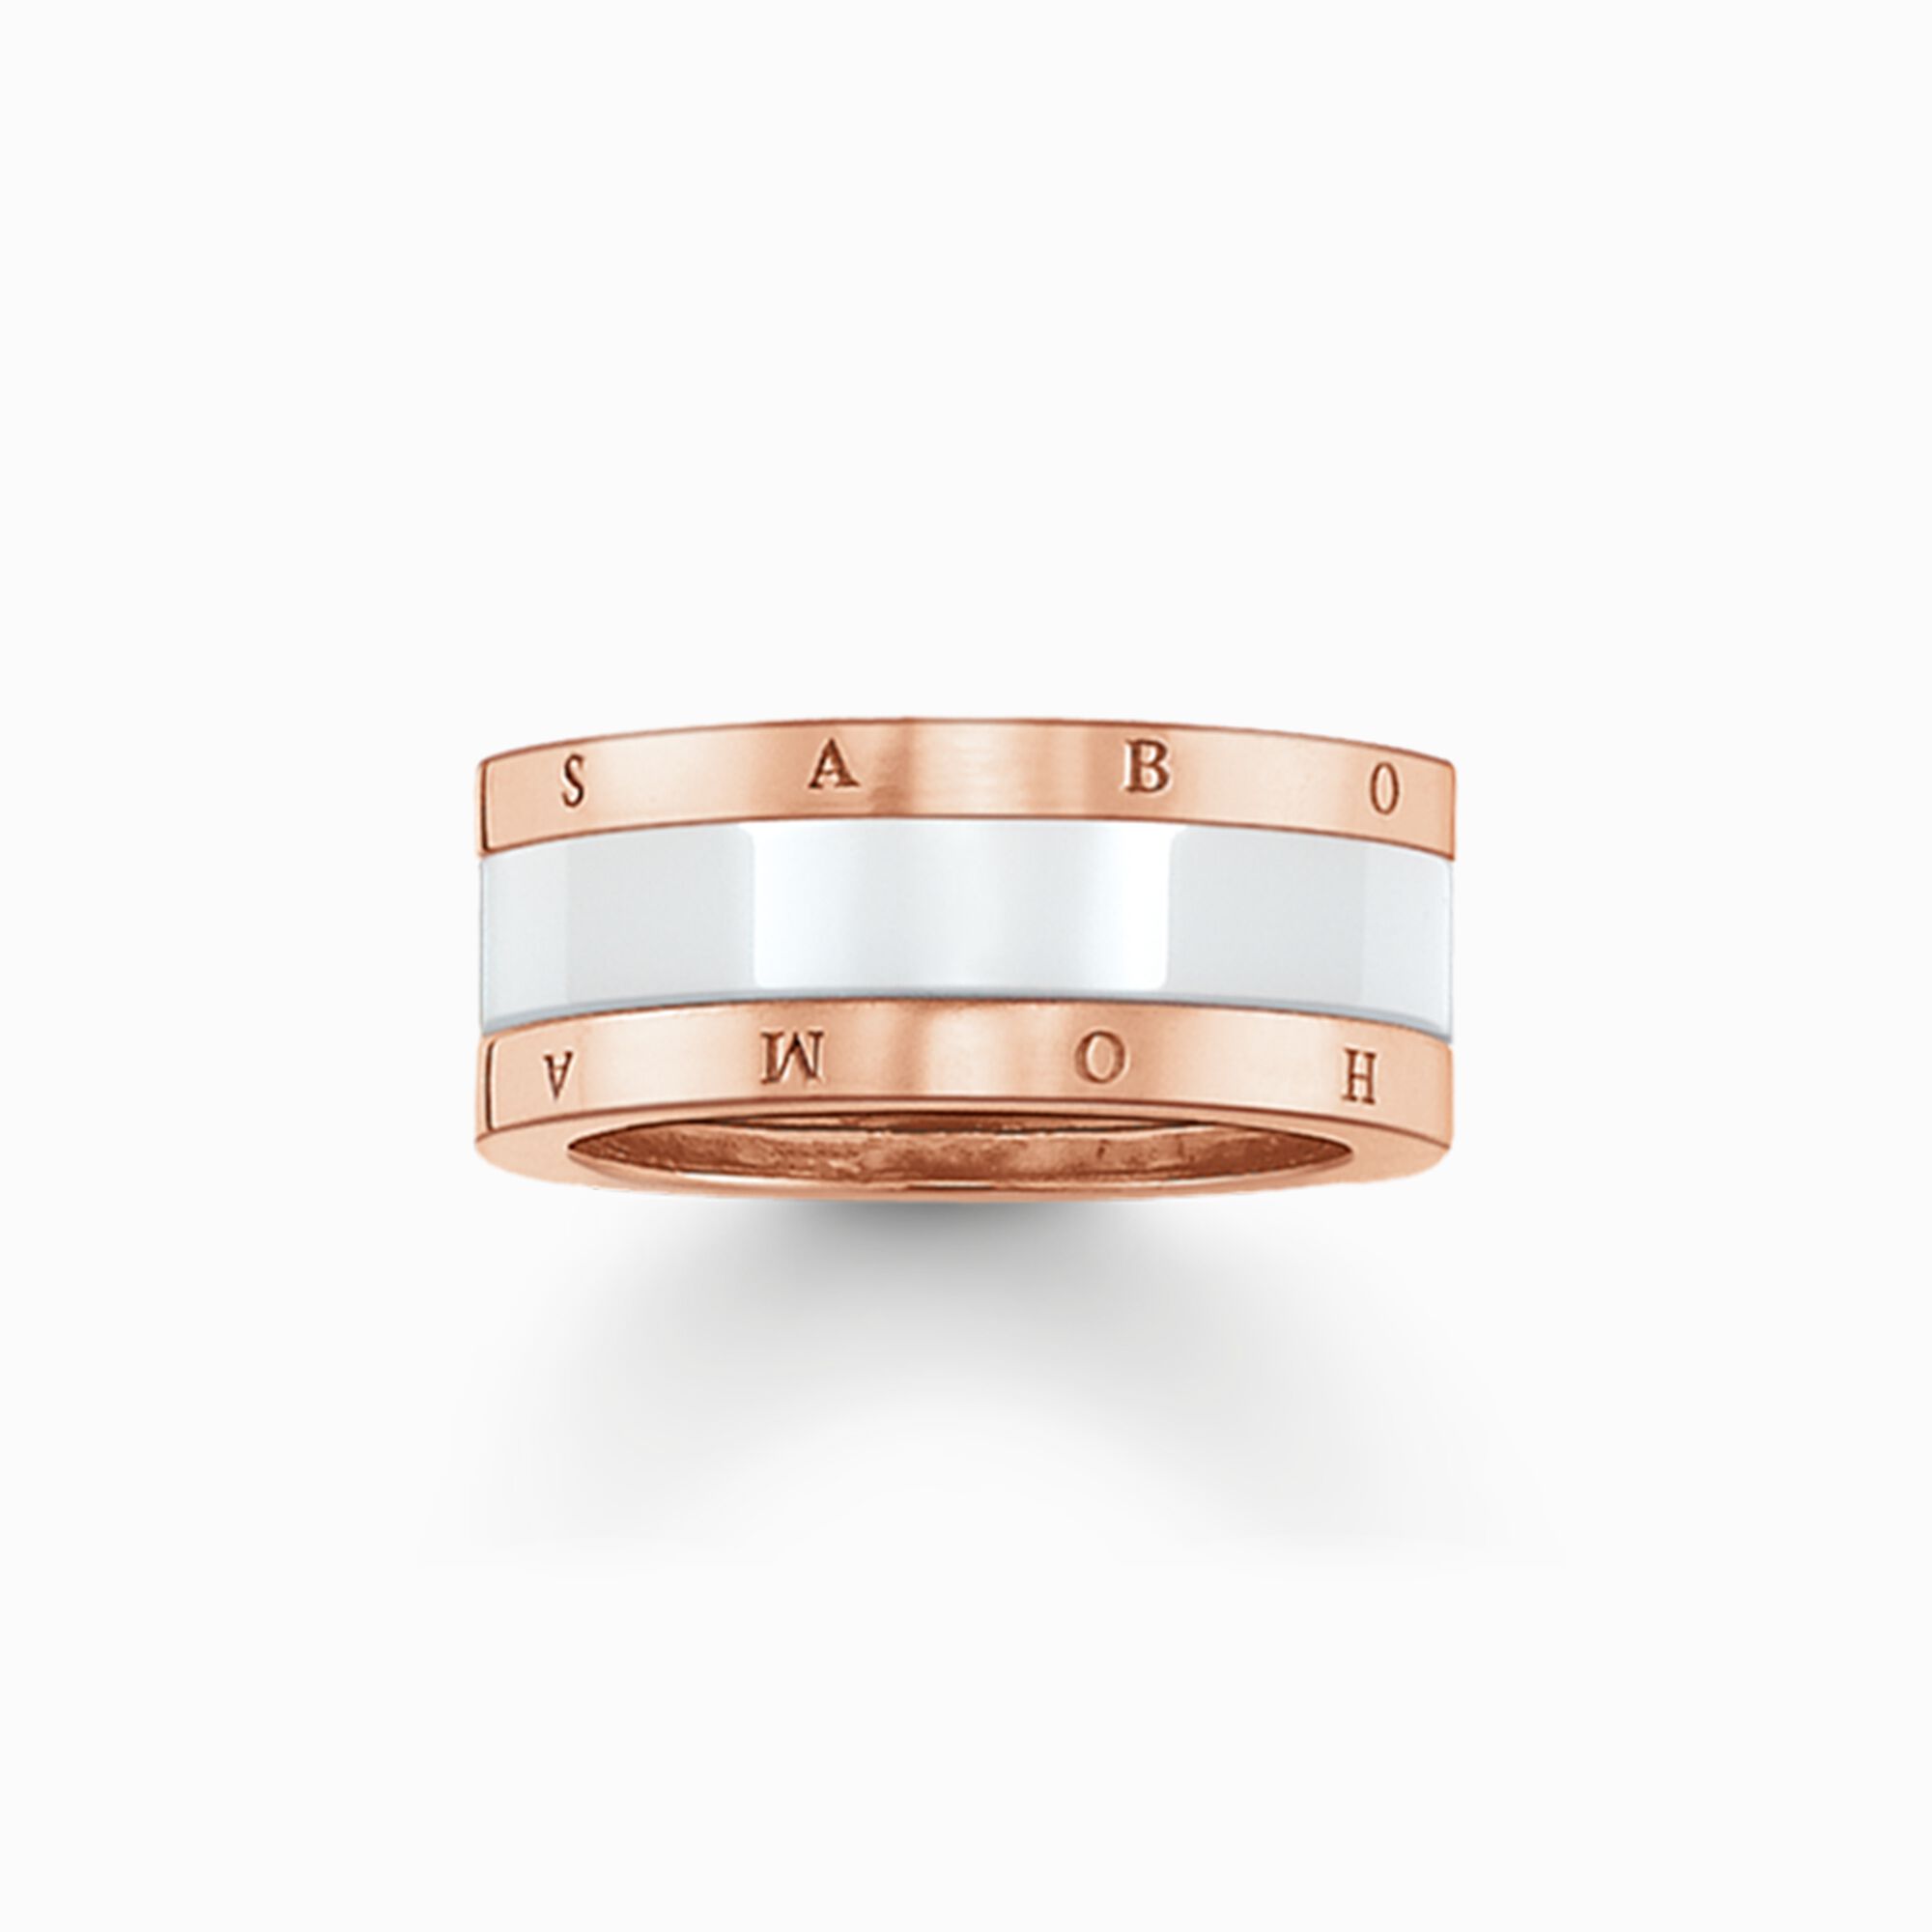 Band ring white Ceramic from the  collection in the THOMAS SABO online store